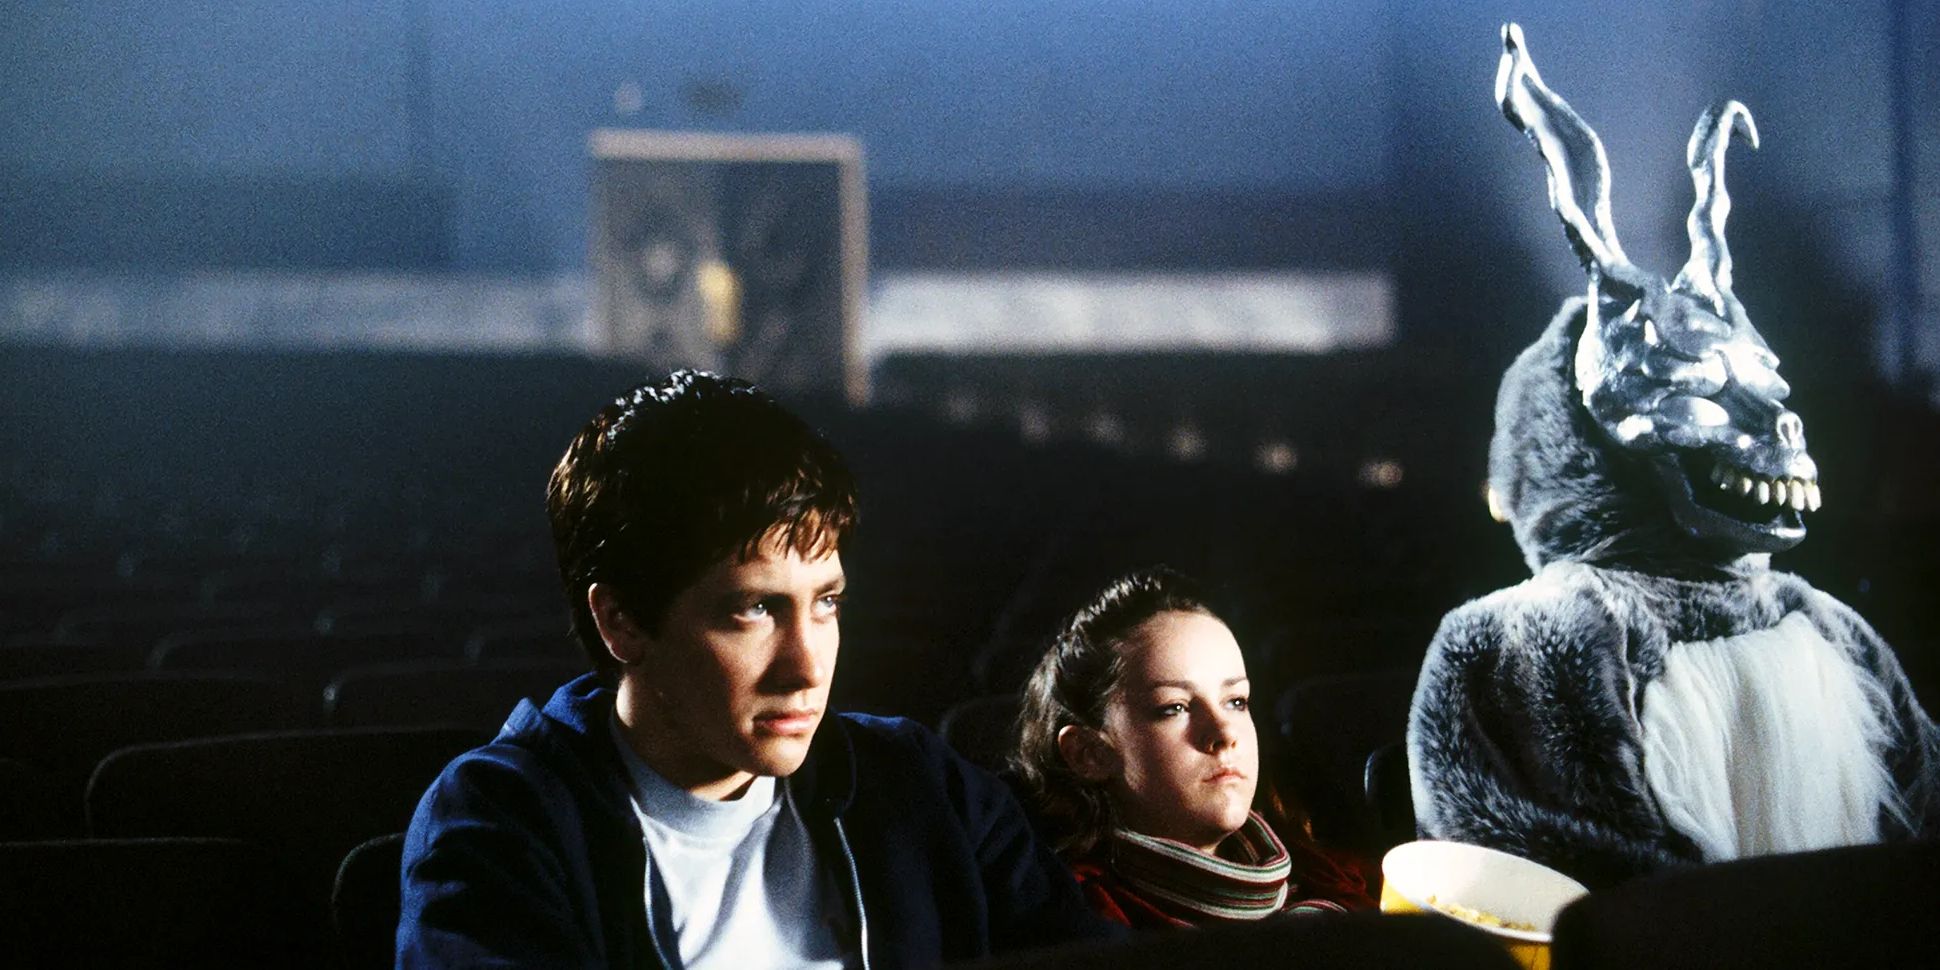 Donnie Darko sits in a movie theater with Frank the Rabbit